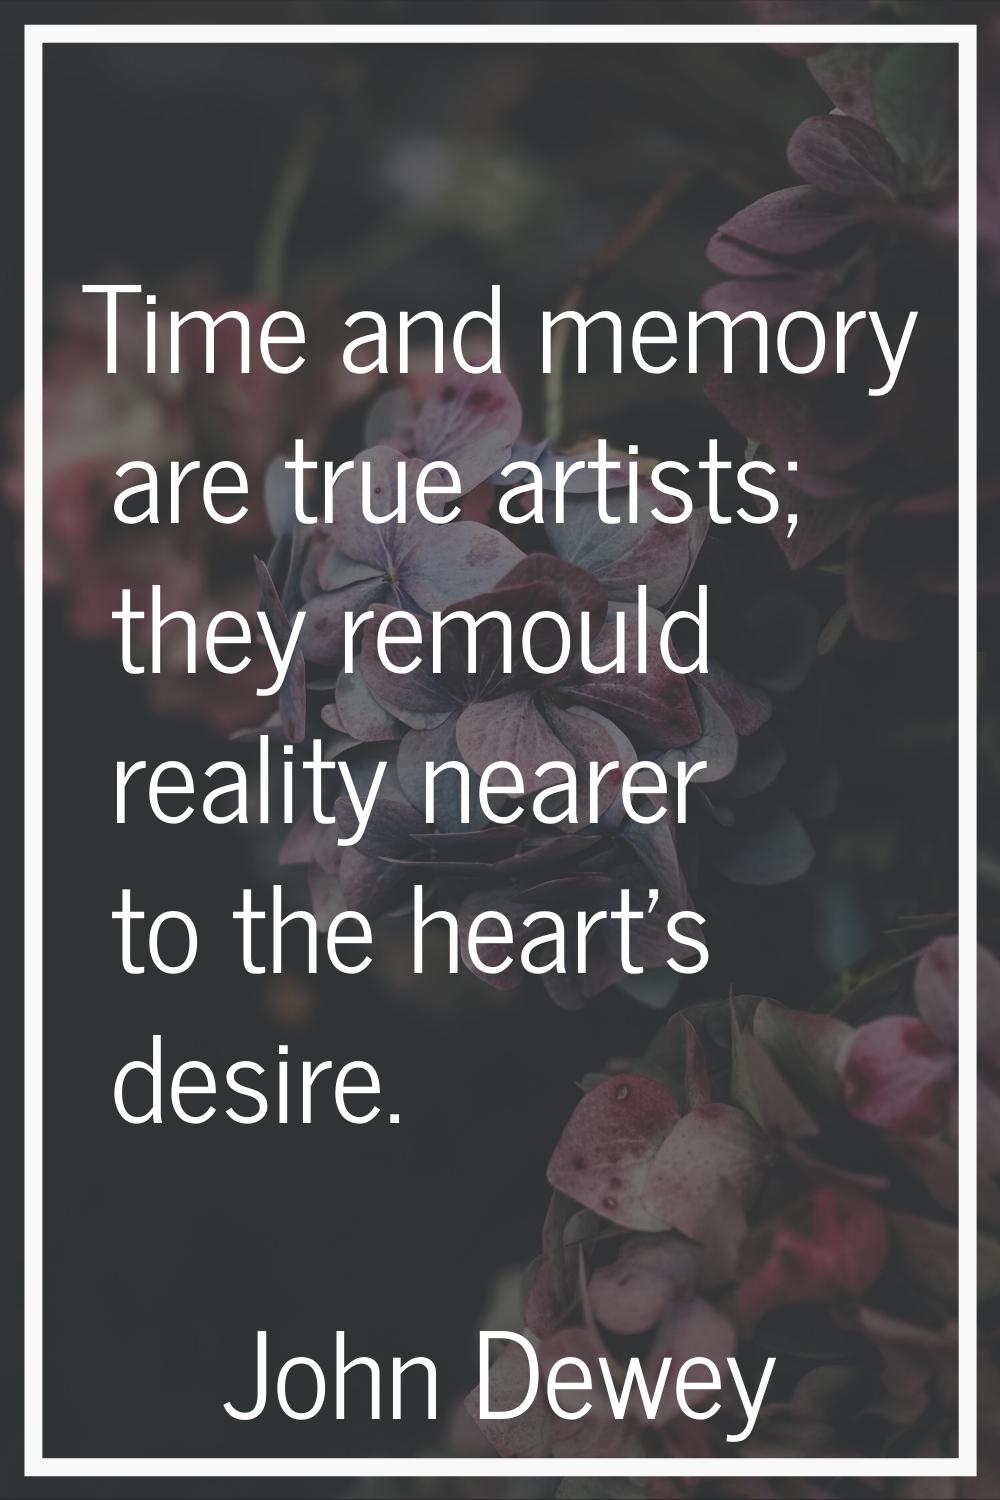 Time and memory are true artists; they remould reality nearer to the heart's desire.